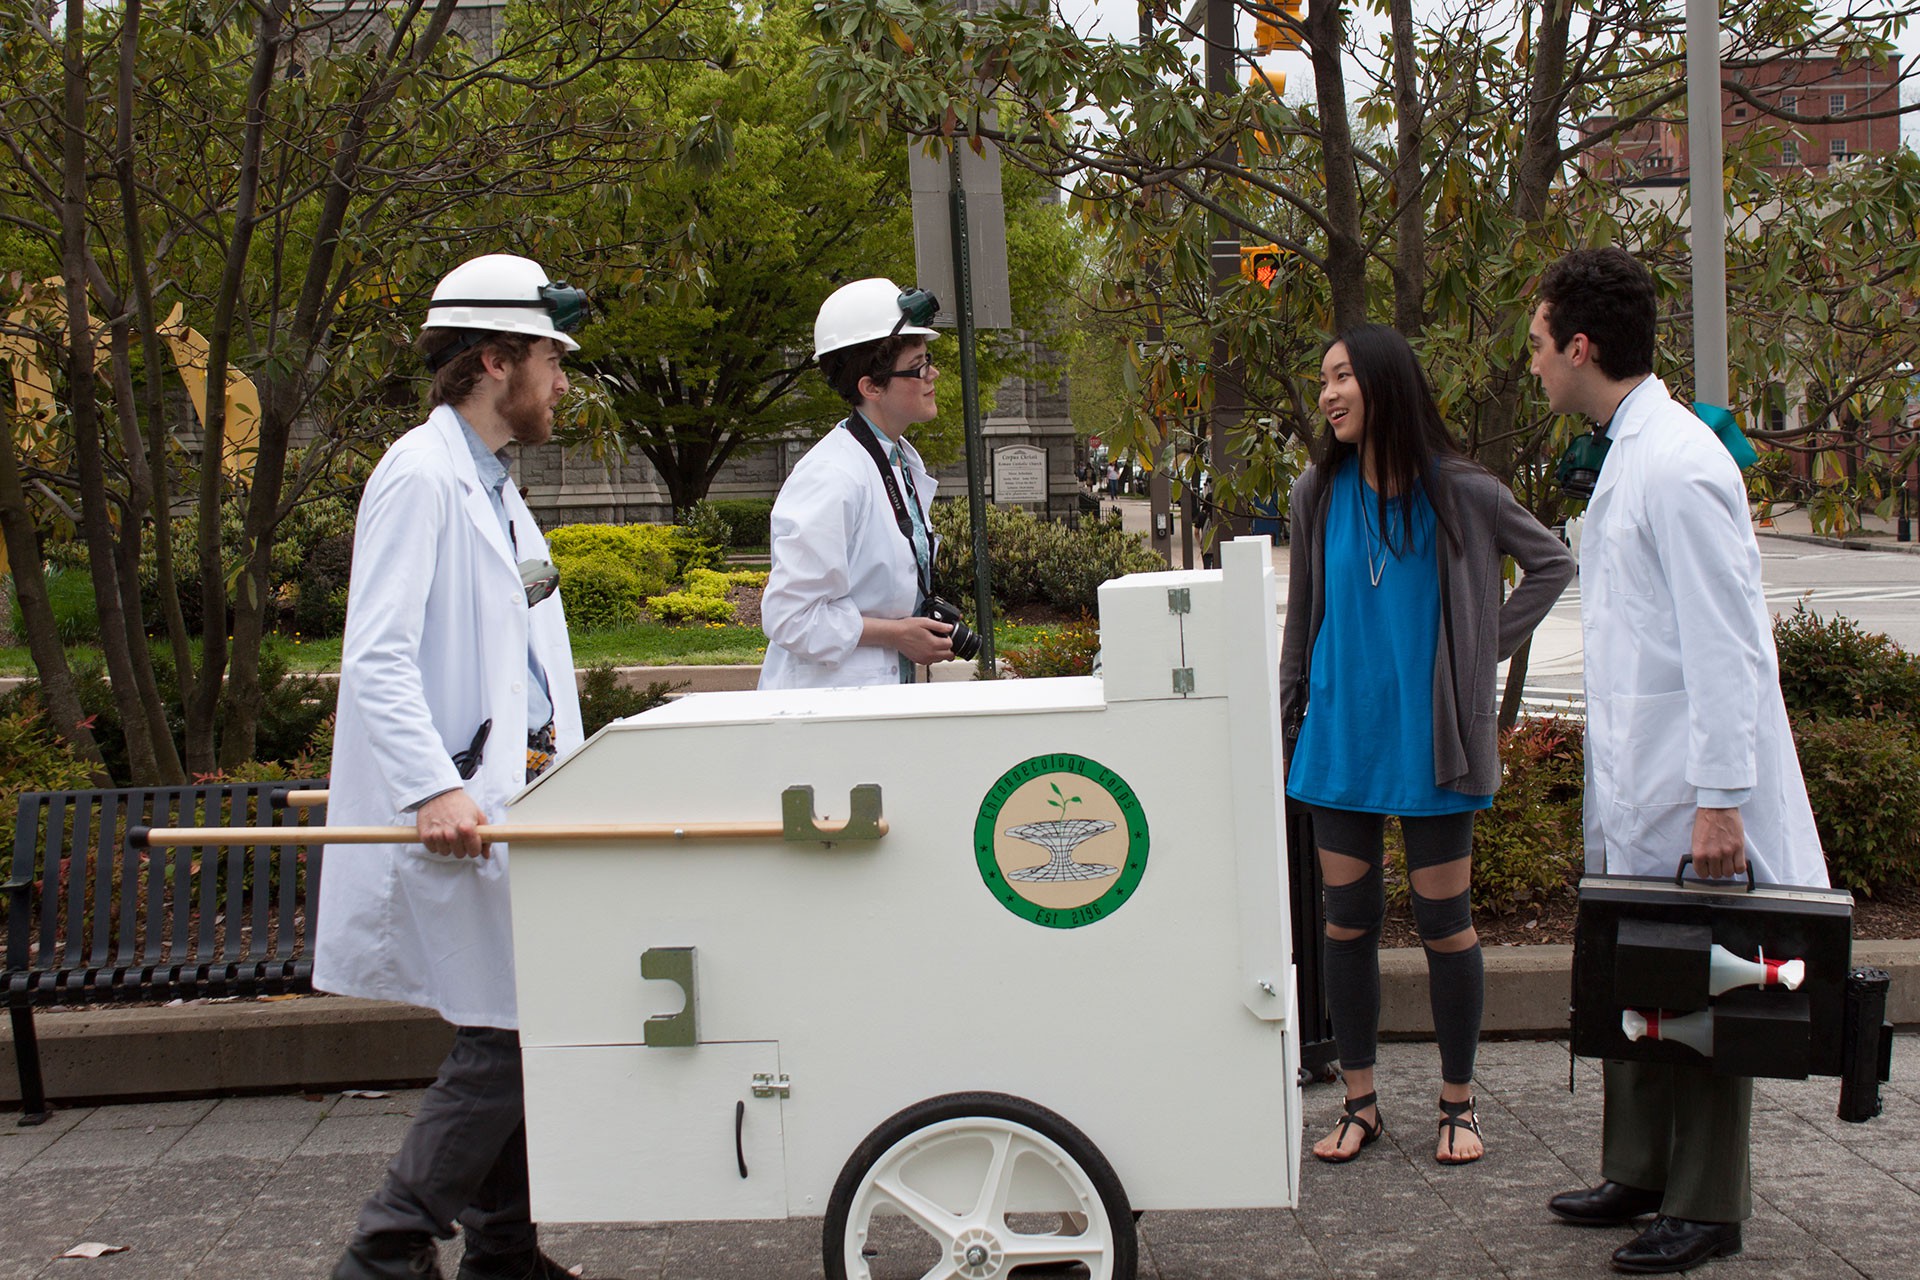 Three people wearing lab coats talking to a women while pushing a white hand cart.